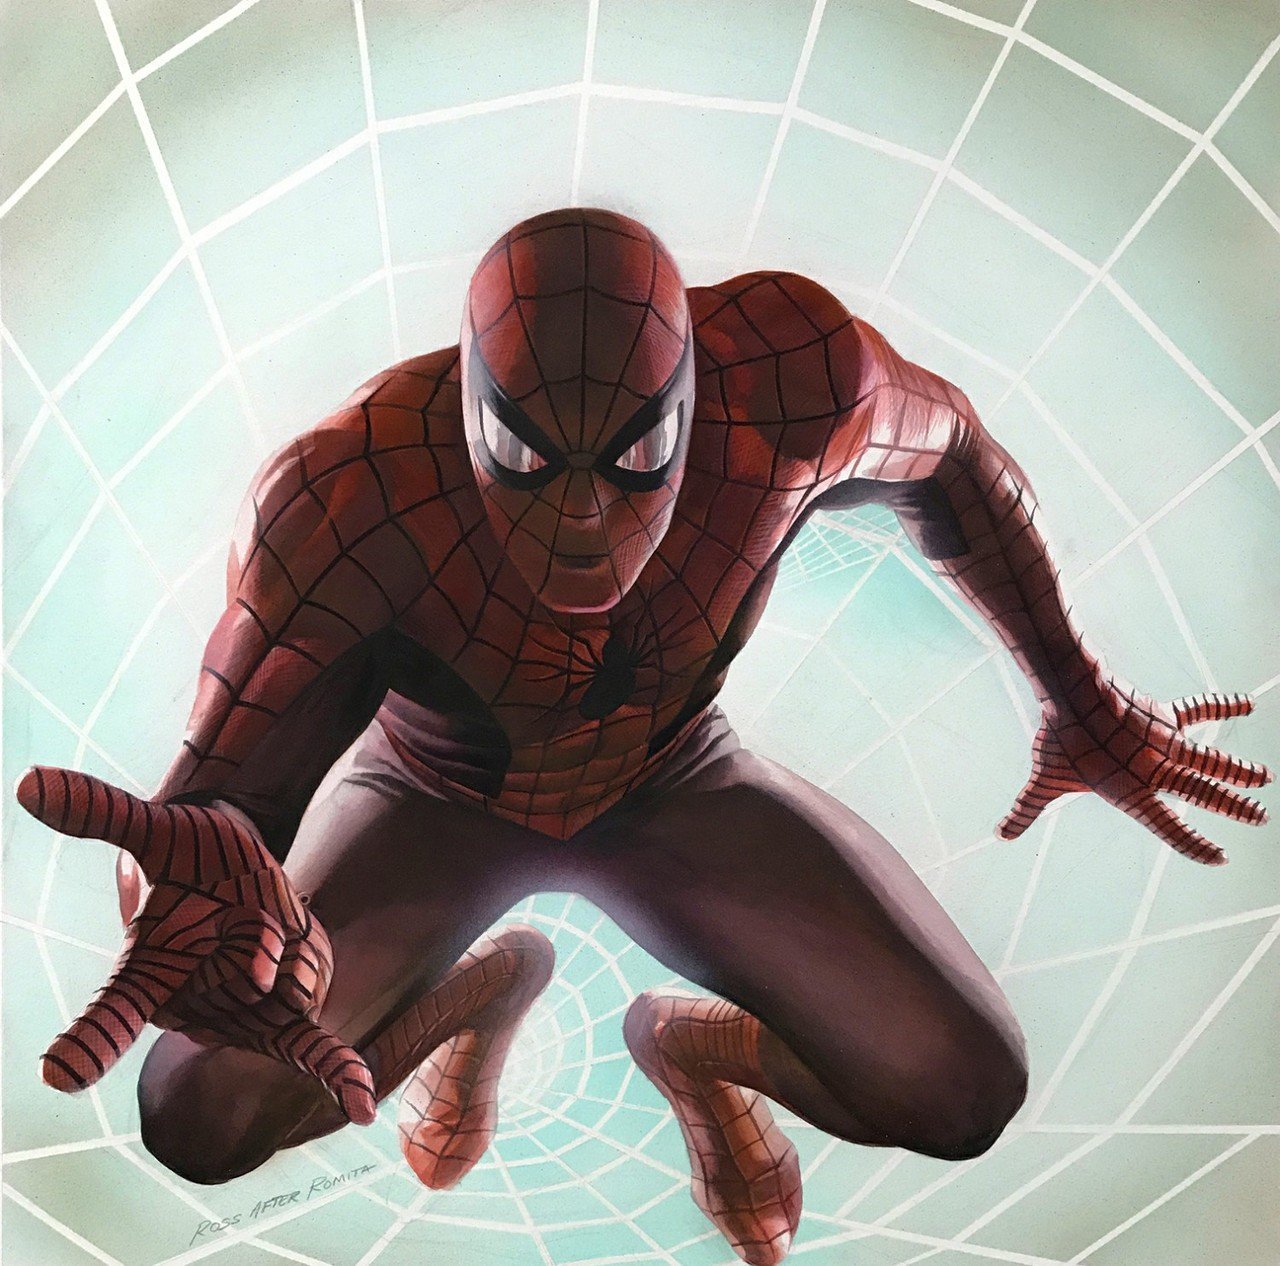 A photorealistic style rendering of Spider-Man